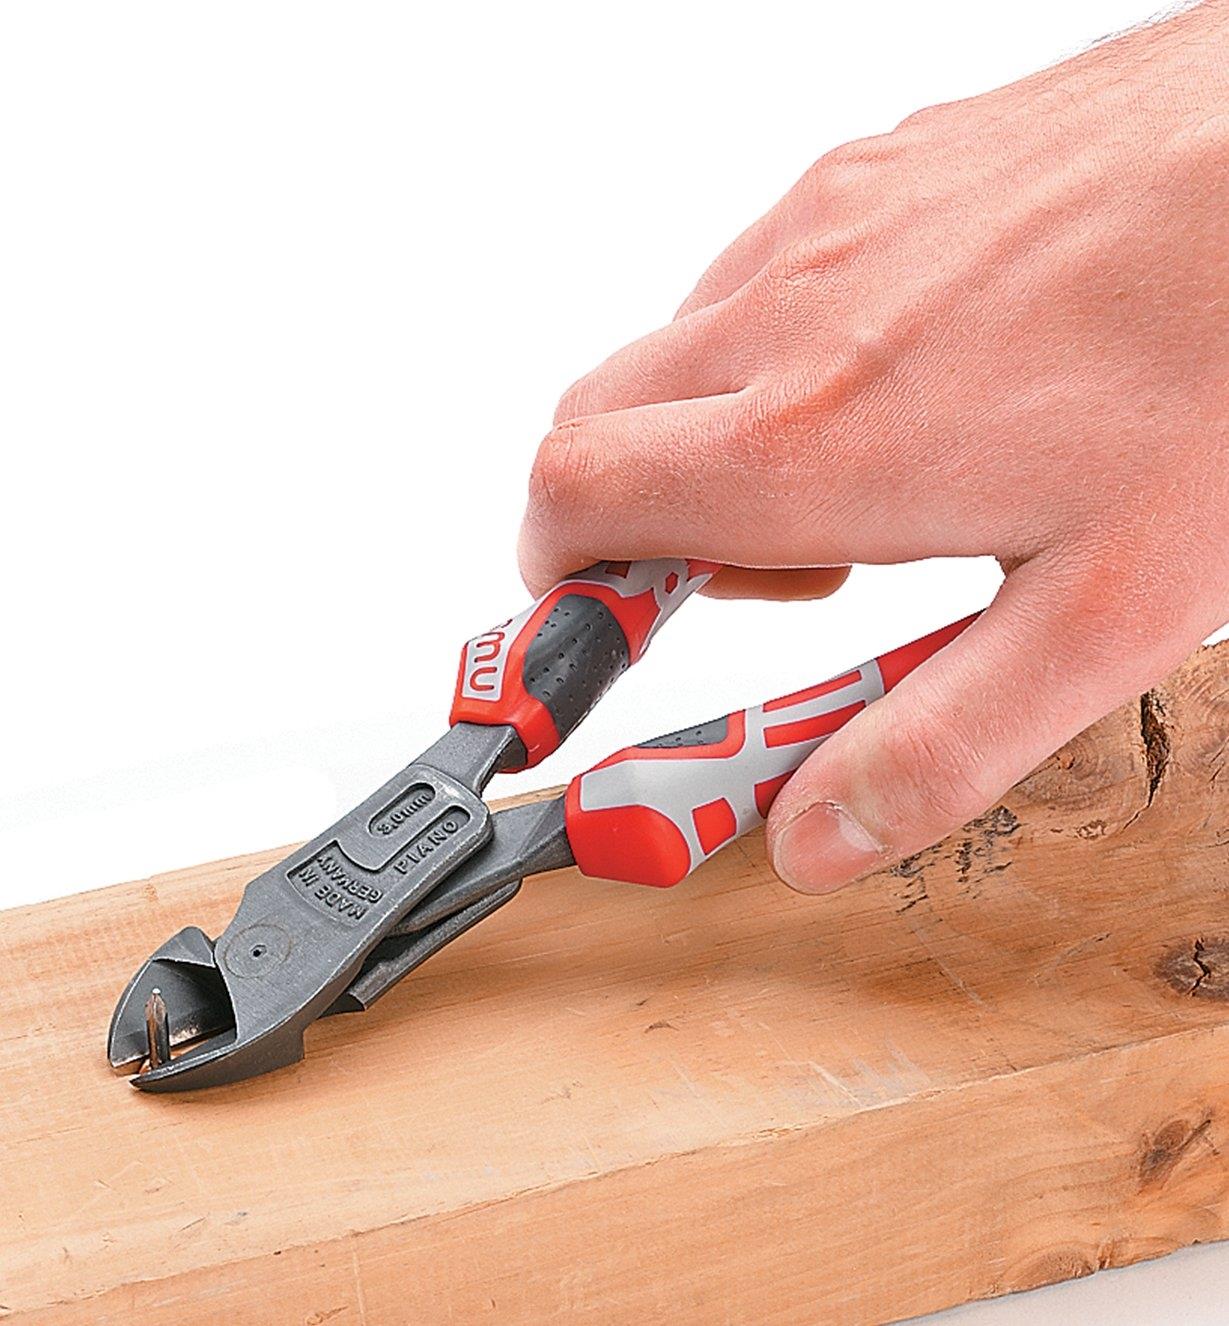 Using NWS Side-Cutters to clip off the end of a nail protruding from a board